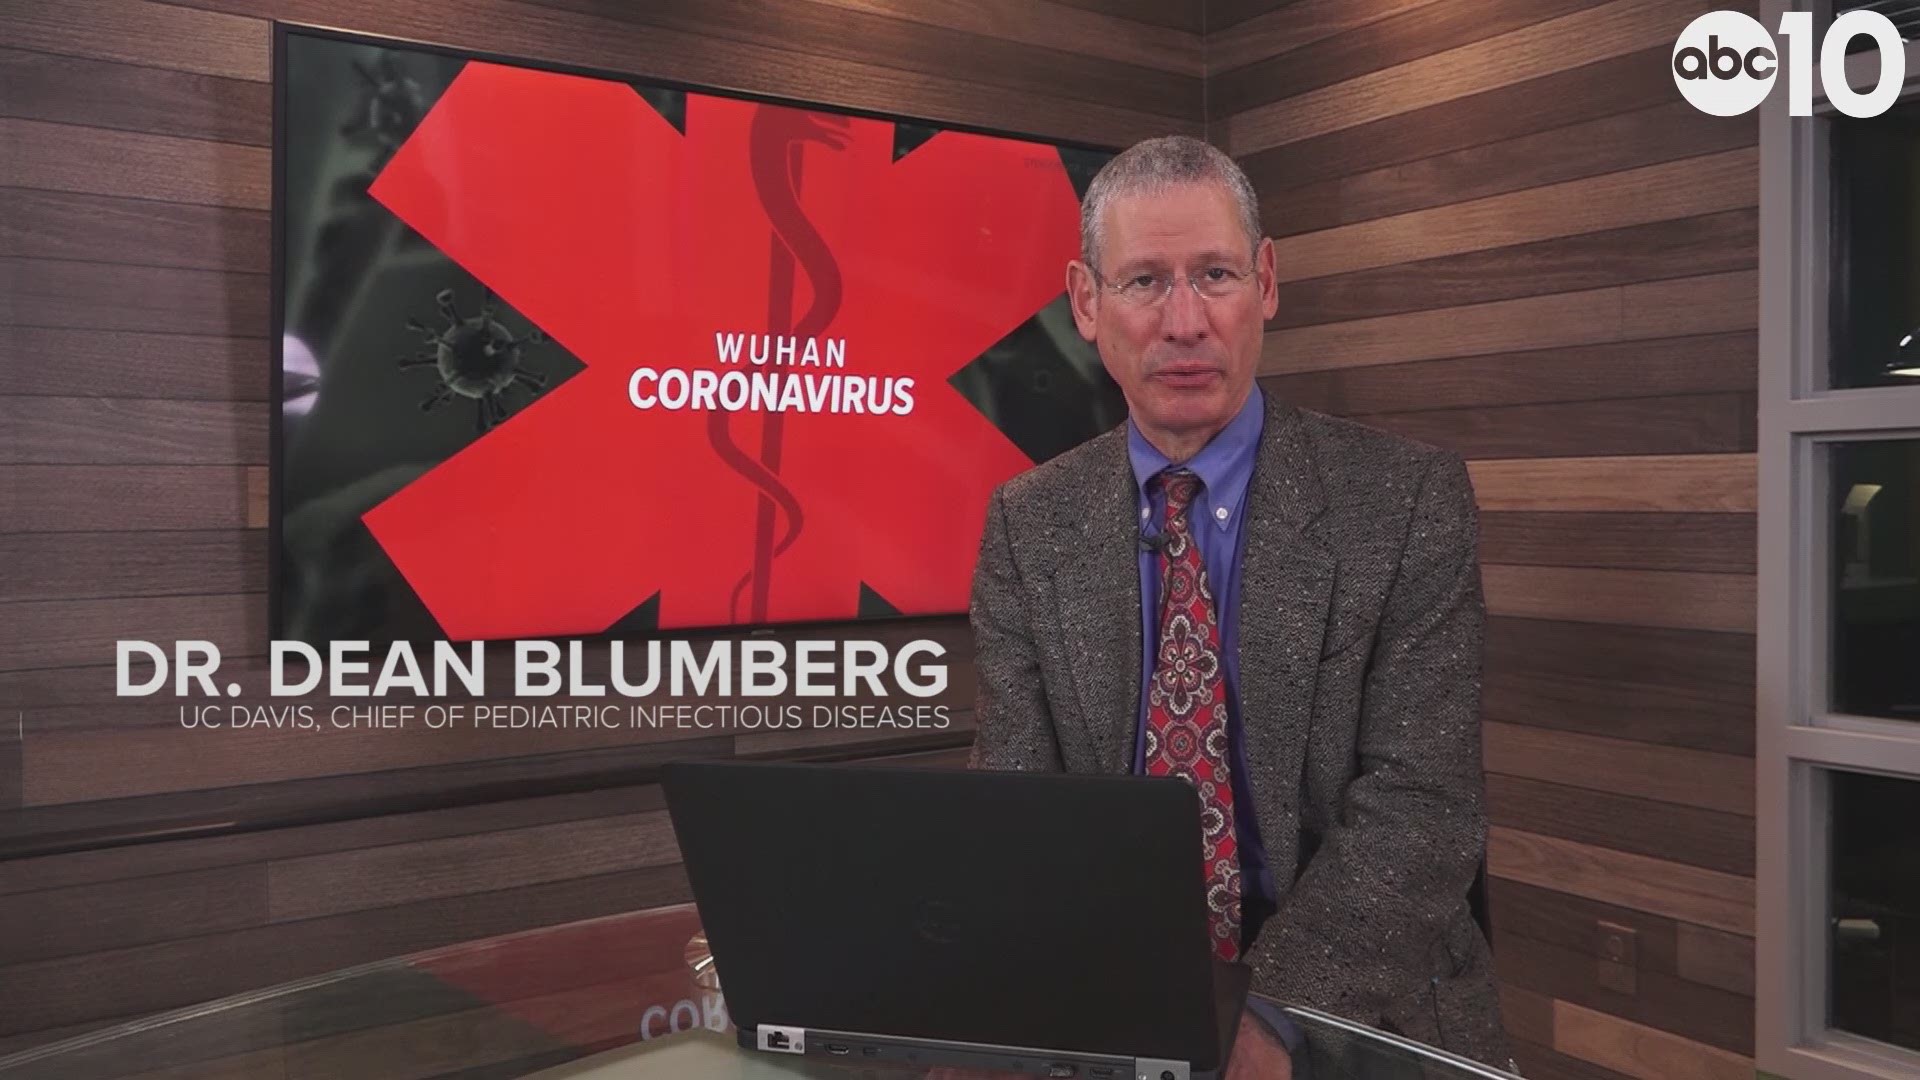 Dr. Dean Blumberg, the Chief of Pediatric Infectious Diseases at UC Davis Children’s Hospital, answered some FAQs from ABC10 viewers about the coronavirus.